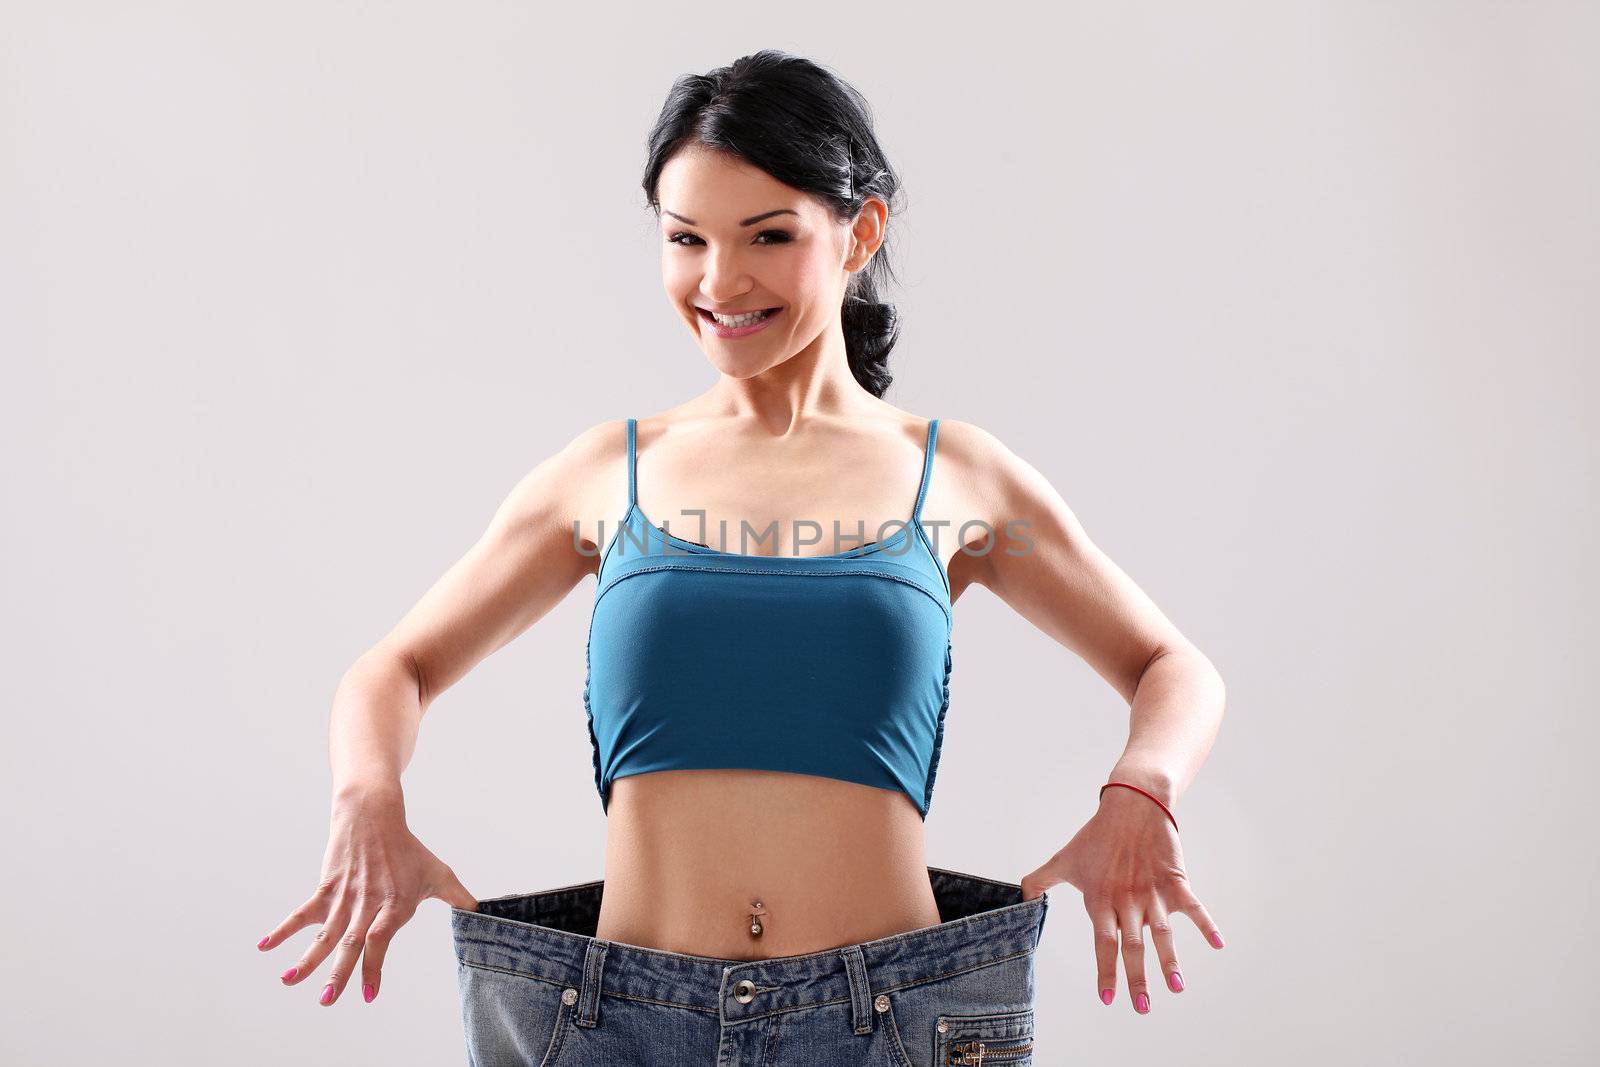 Cute slim girl wearing old jeans after weight loss in studio